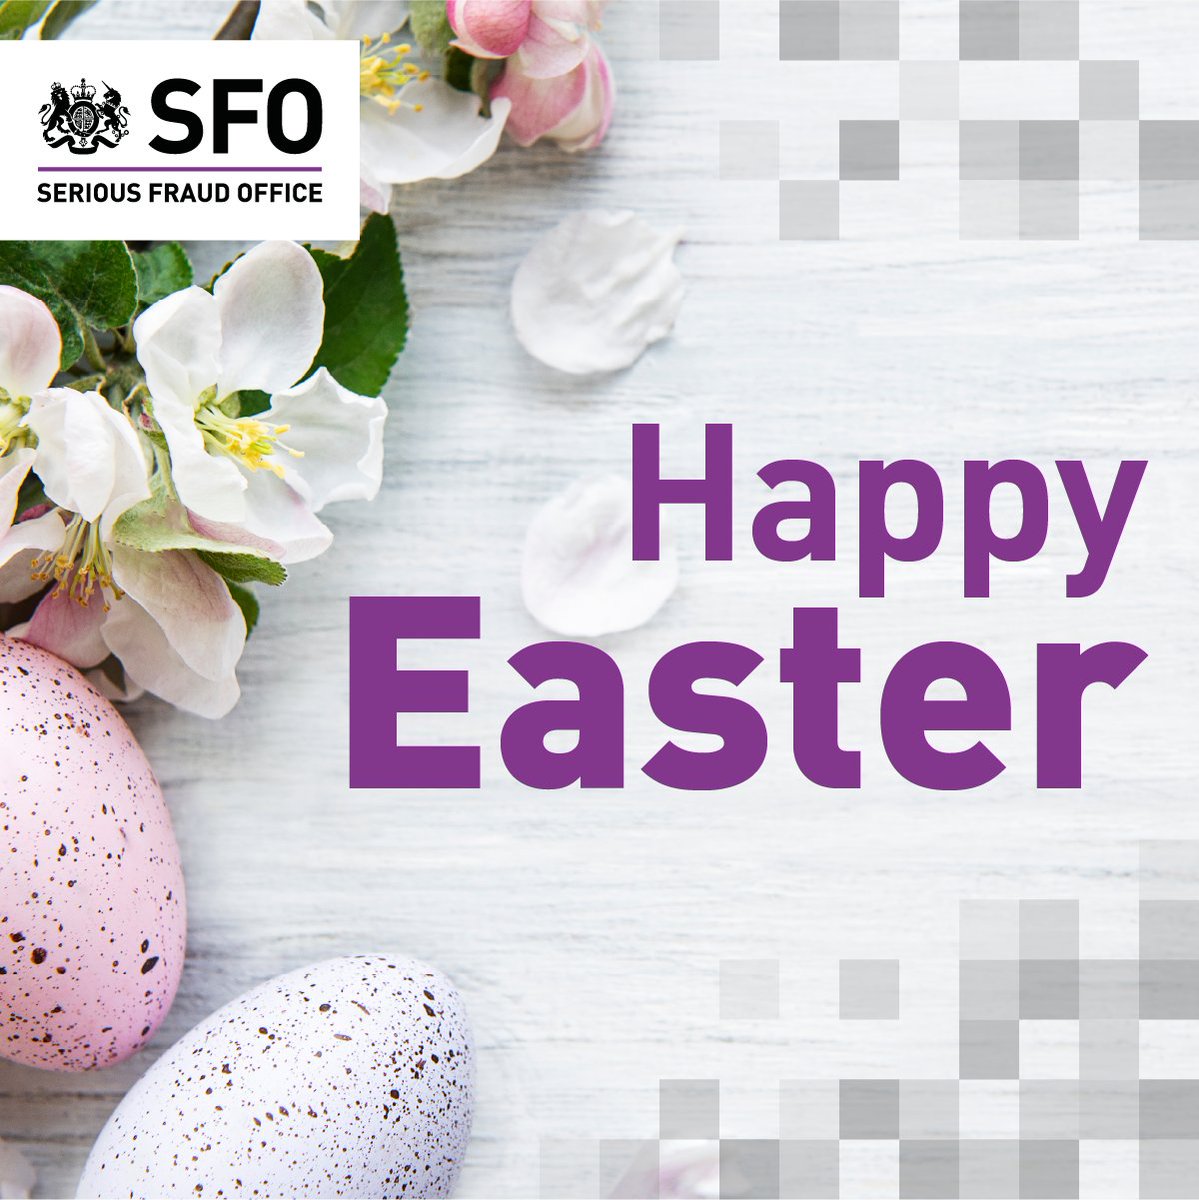 Happy Easter to all those celebrating at the SFO and around the world!